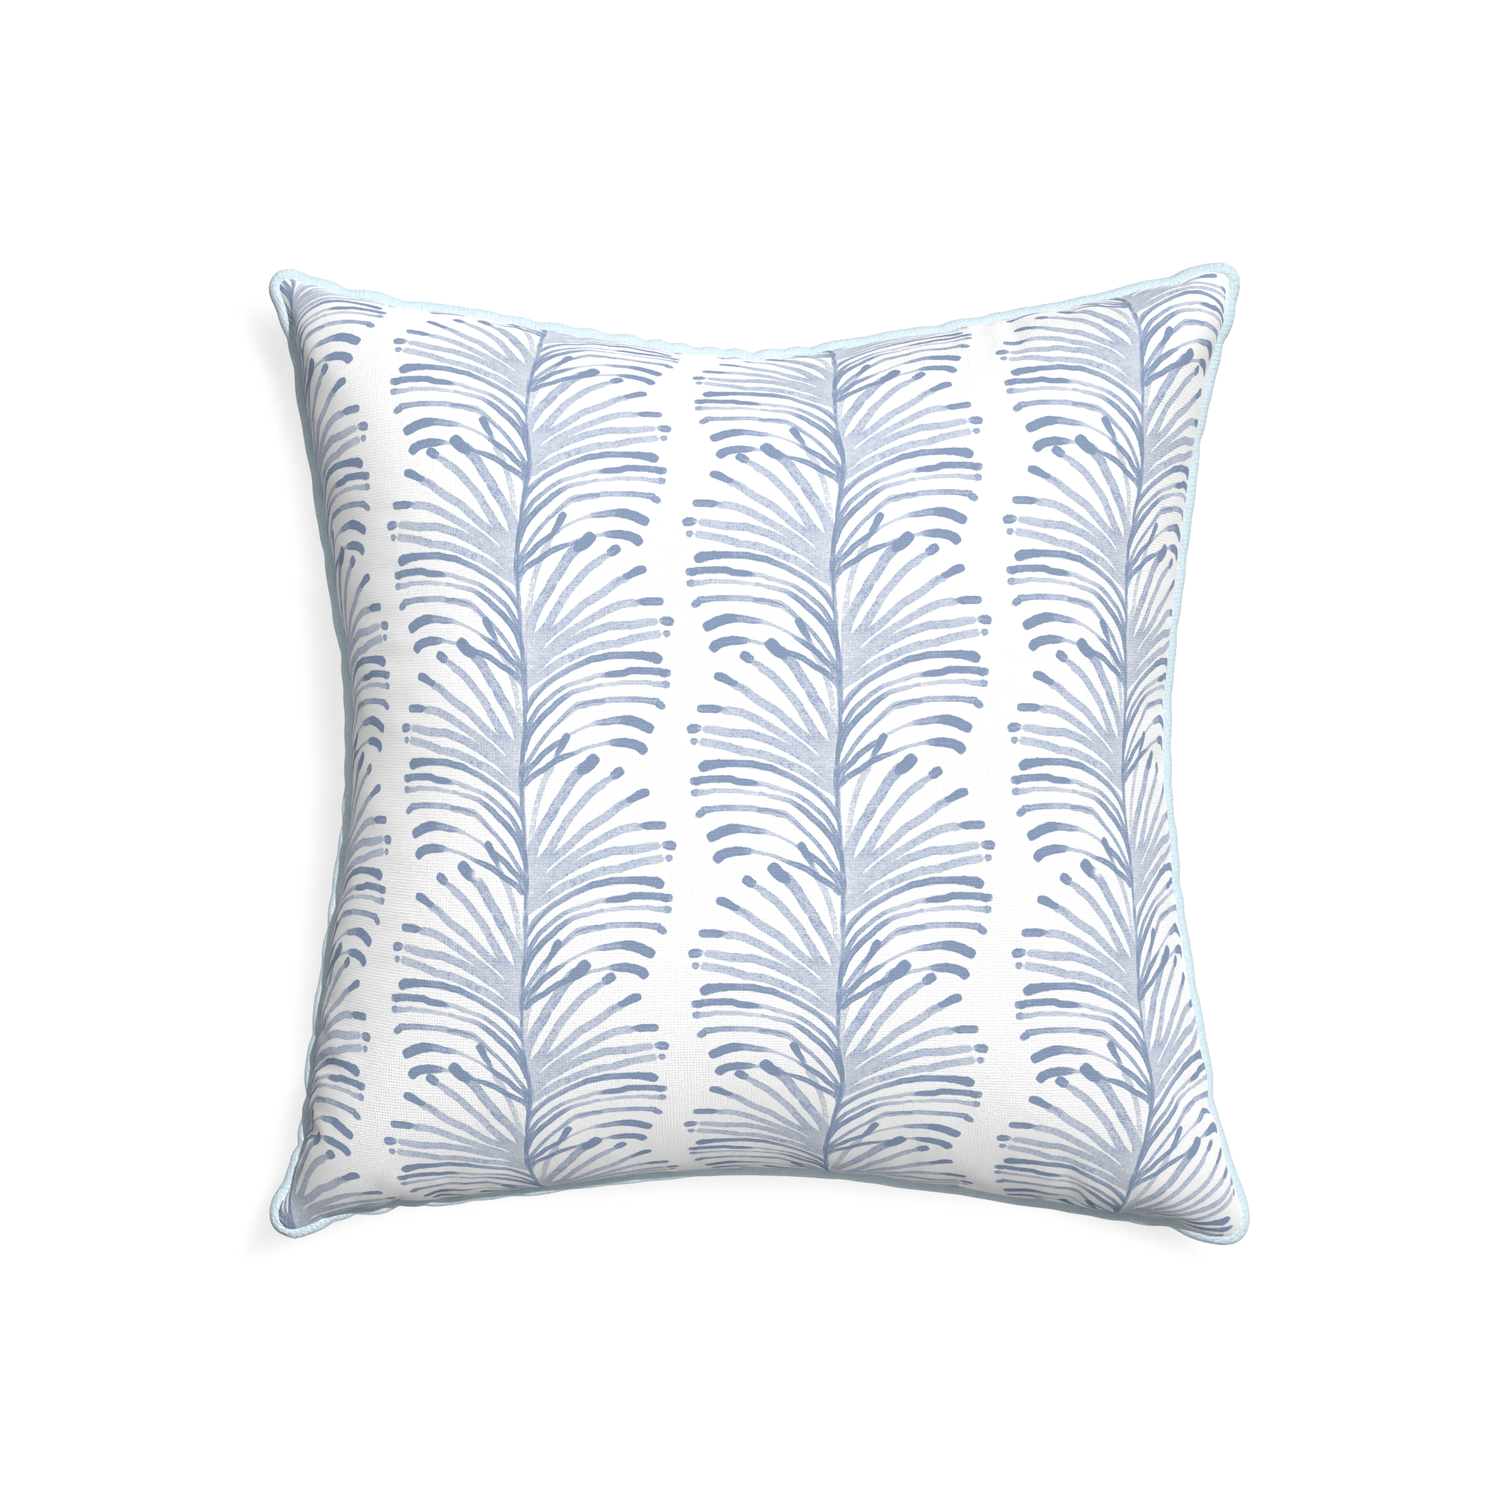 22-square emma sky custom pillow with powder piping on white background